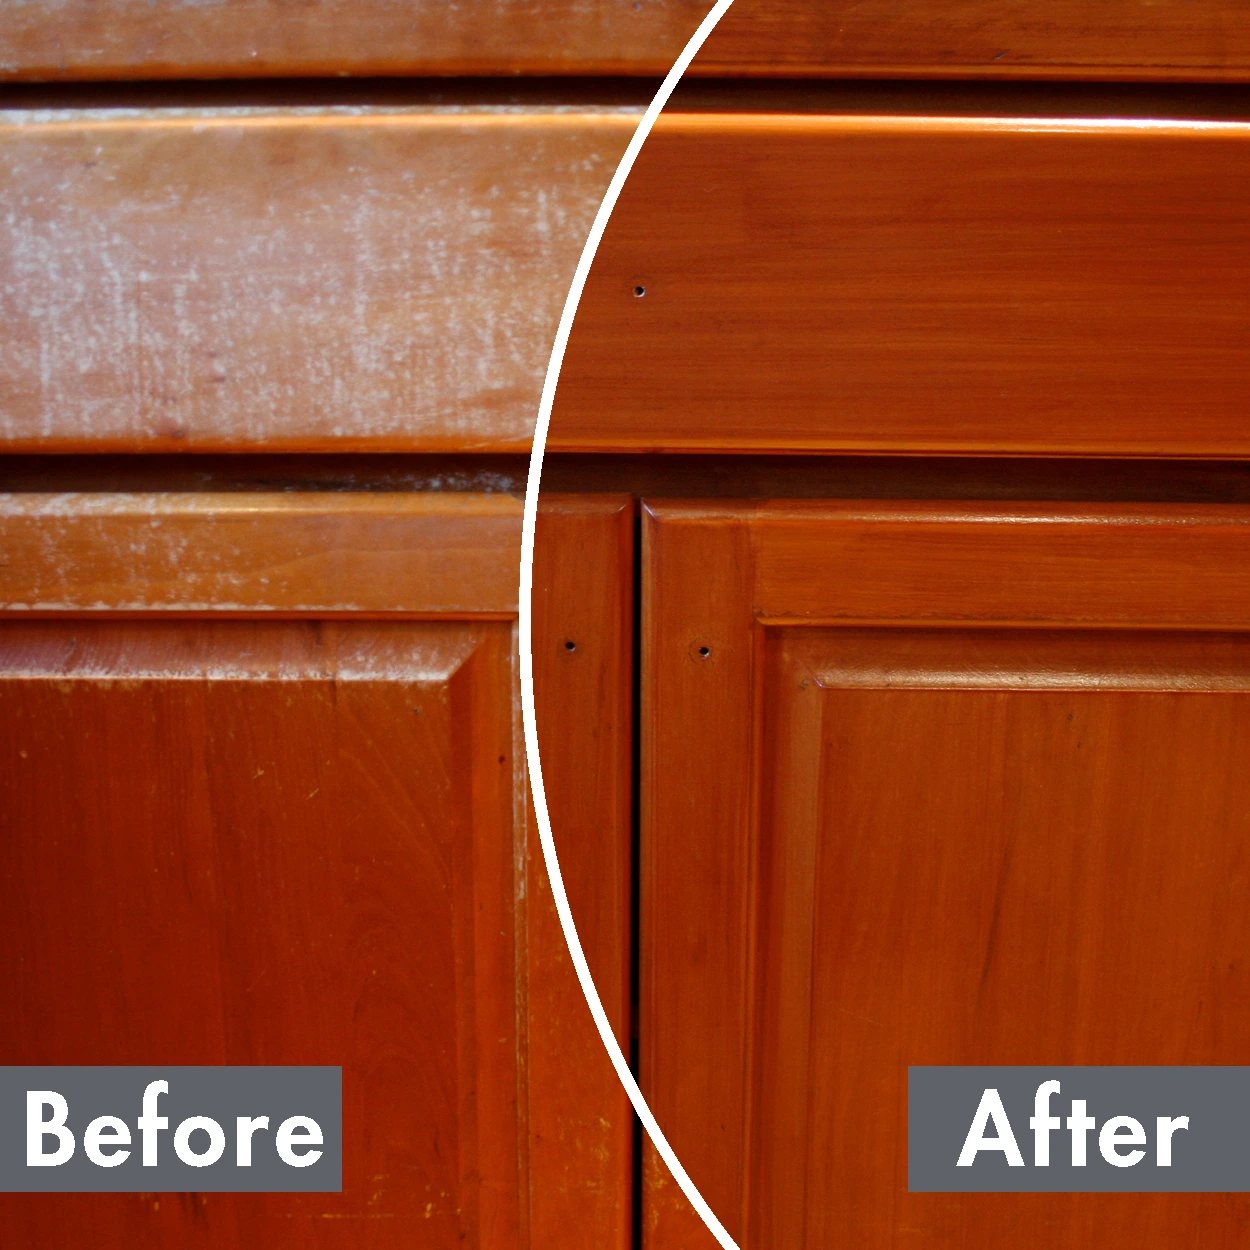 On the left, a worn cabinet with scuffs and scratches before N-Hance refinishing work. On the right, the same cabinet looks brand new after N-Hance cabinet refinishing.